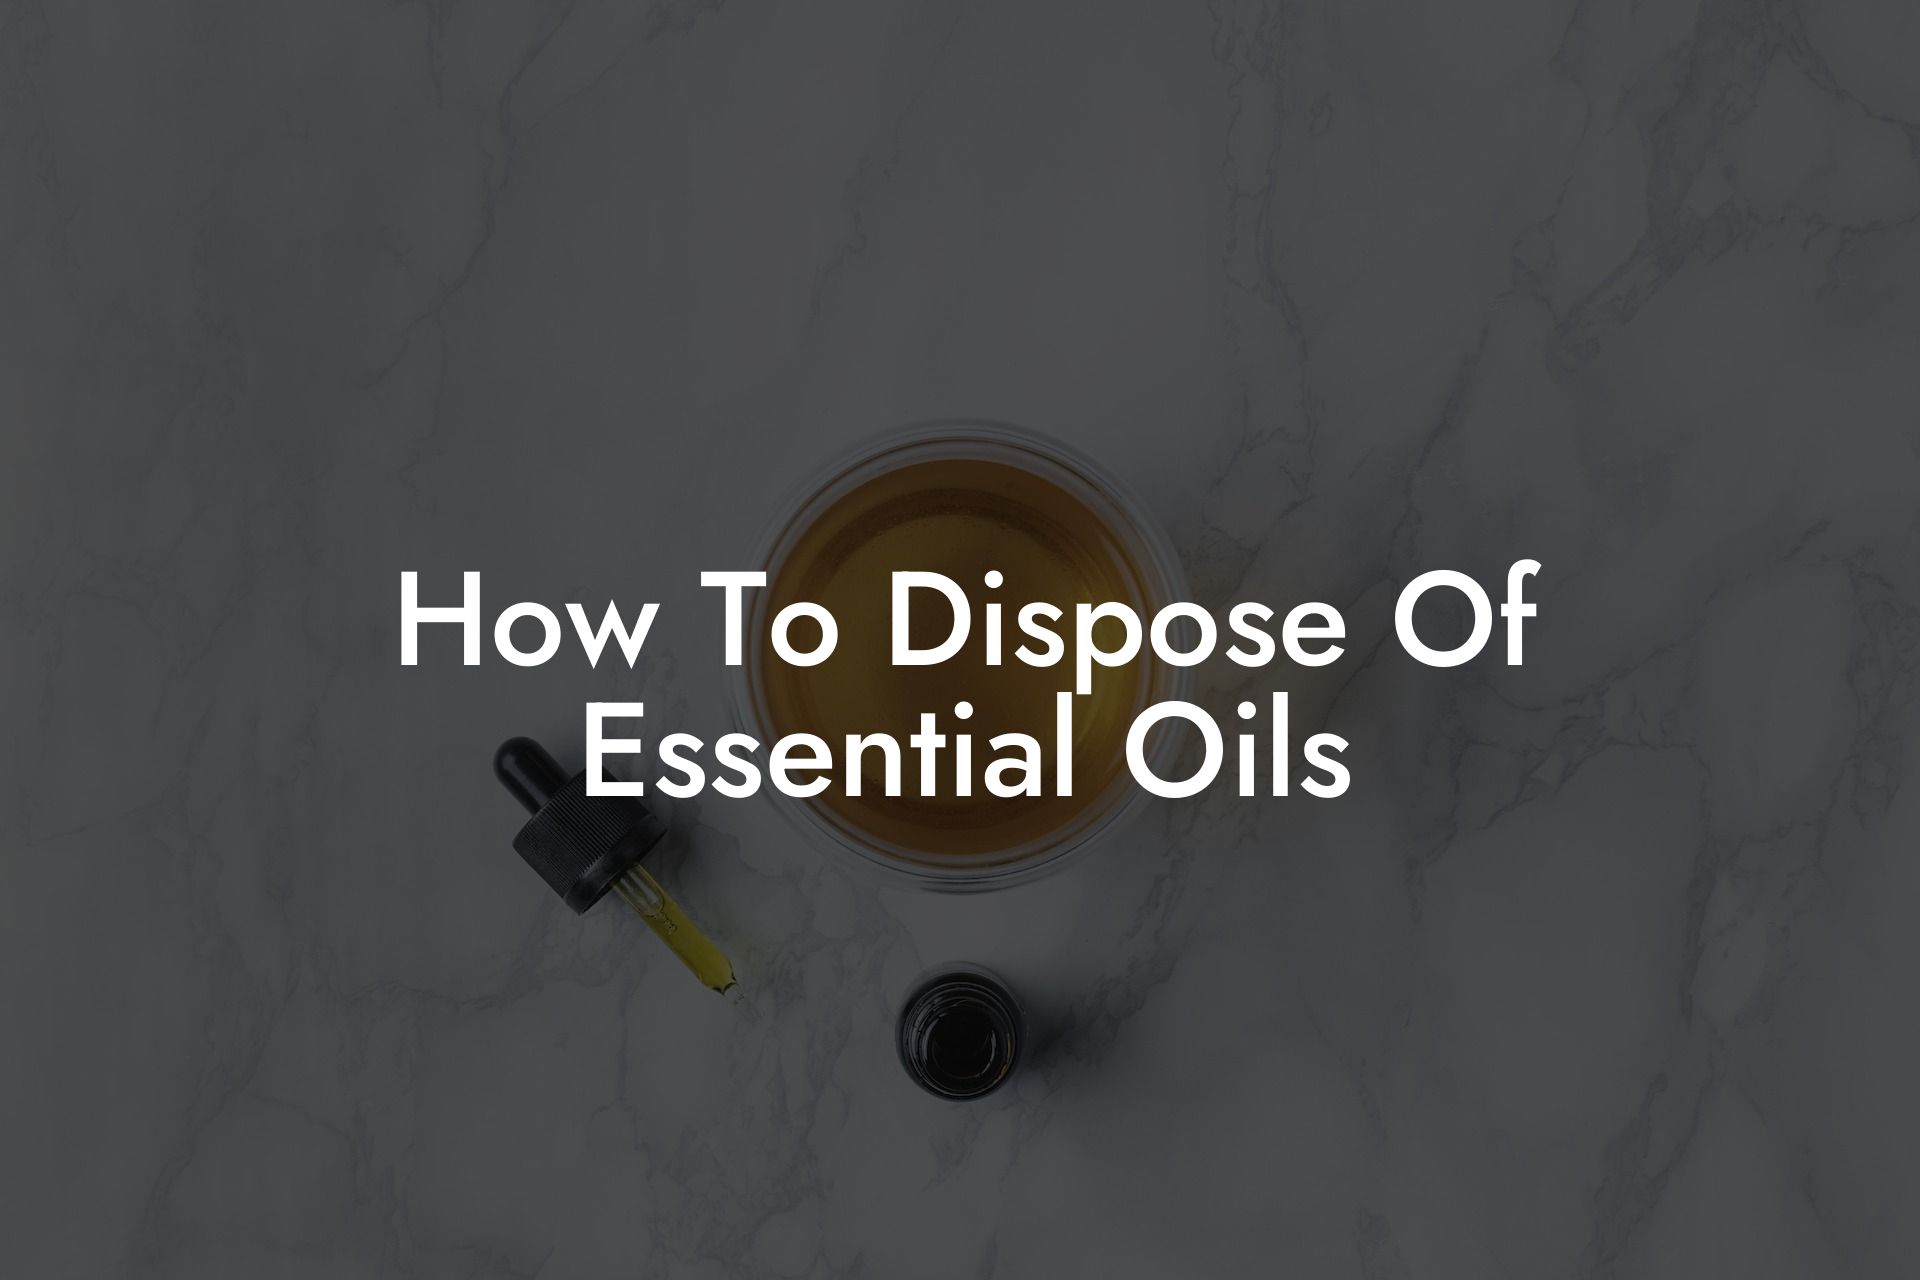 How To Dispose Of Essential Oils